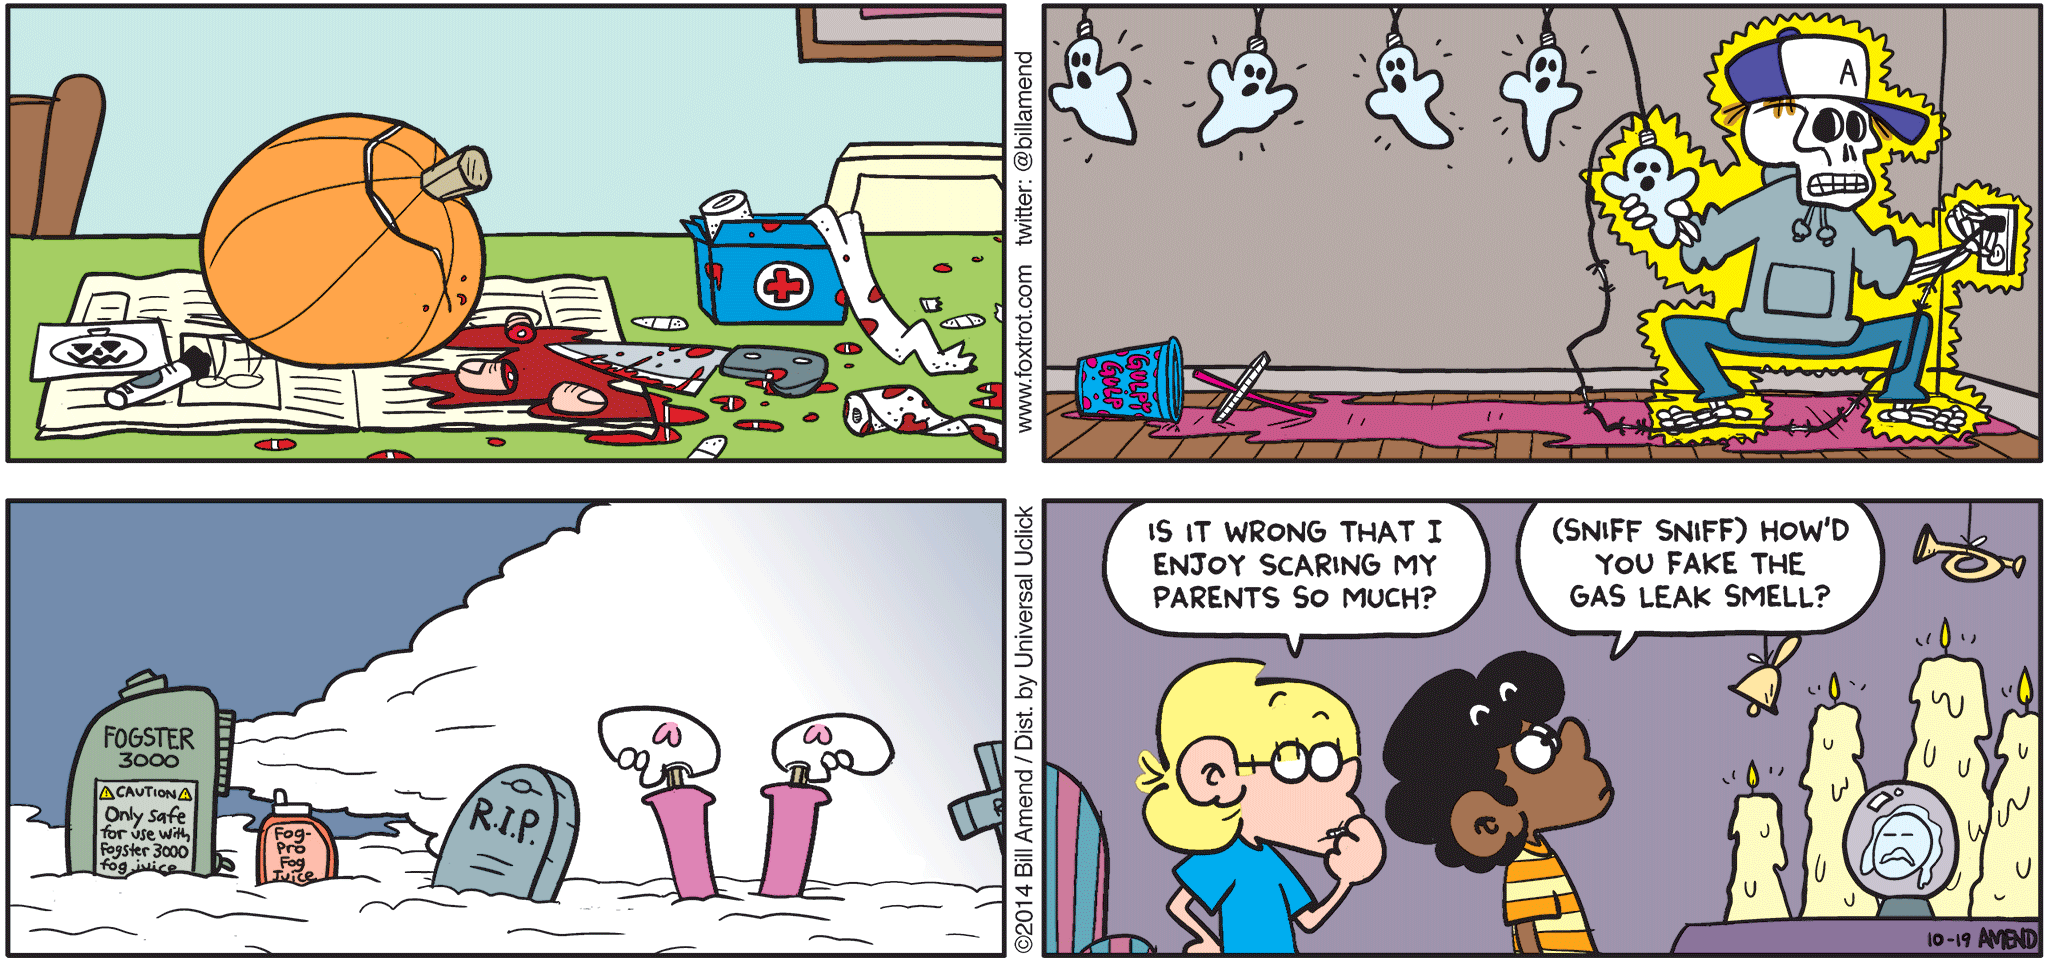 Halloween Comics - FoxTrot by Bill Amend - "Halloween Horrors" published October 19, 2014 - Jason: Is it wrong that I enjoy scaring my parents to much? Marcus: (sniff sniff) How'd you fake the gas leak smell?